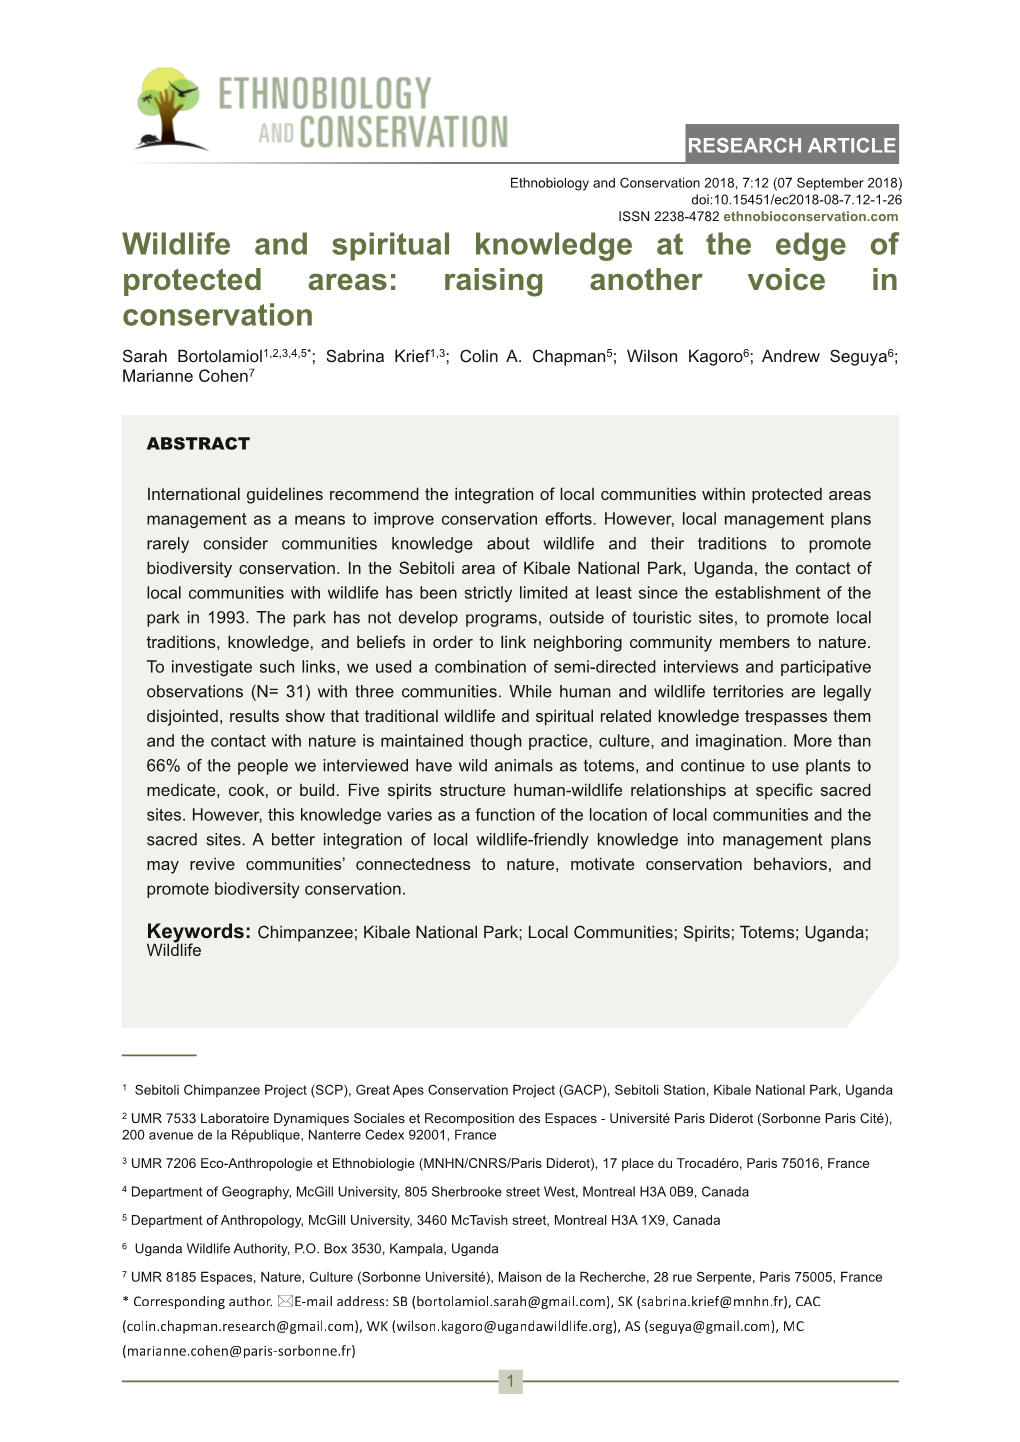 Wildlife and Spiritual Knowledge at the Edge of Protected Areas: Raising Another Voice in Conservation Sarah Bortolamiol1,2,3,4,5*; Sabrina Krief1,3; Colin A